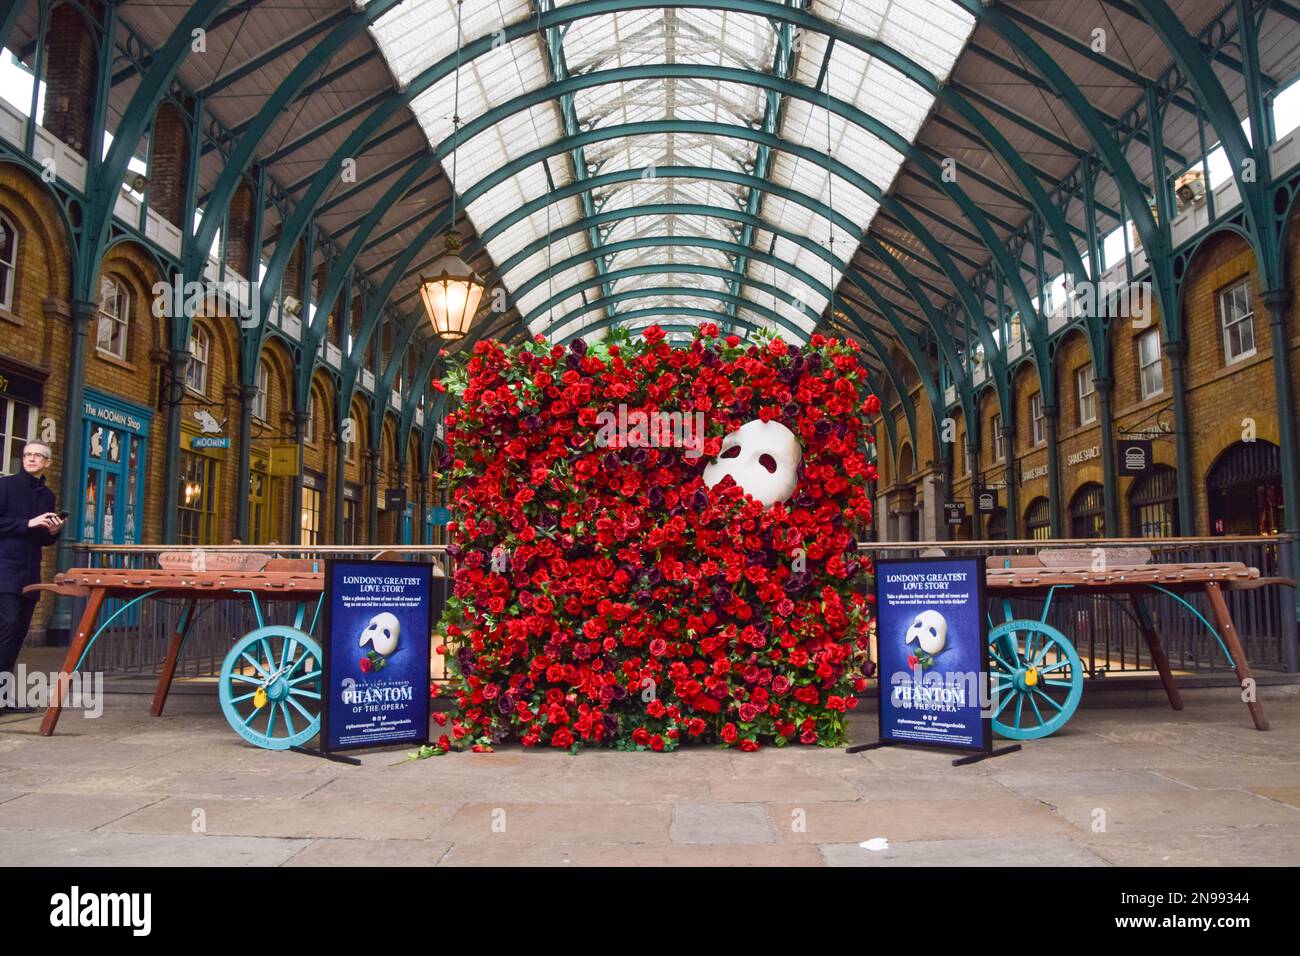 London, UK. 11th February 2023. The Phantom Of The Opera red rose flower wall installation in Covent Garden, part of the Month of Musicals celebrating musical theatre. Stock Photo